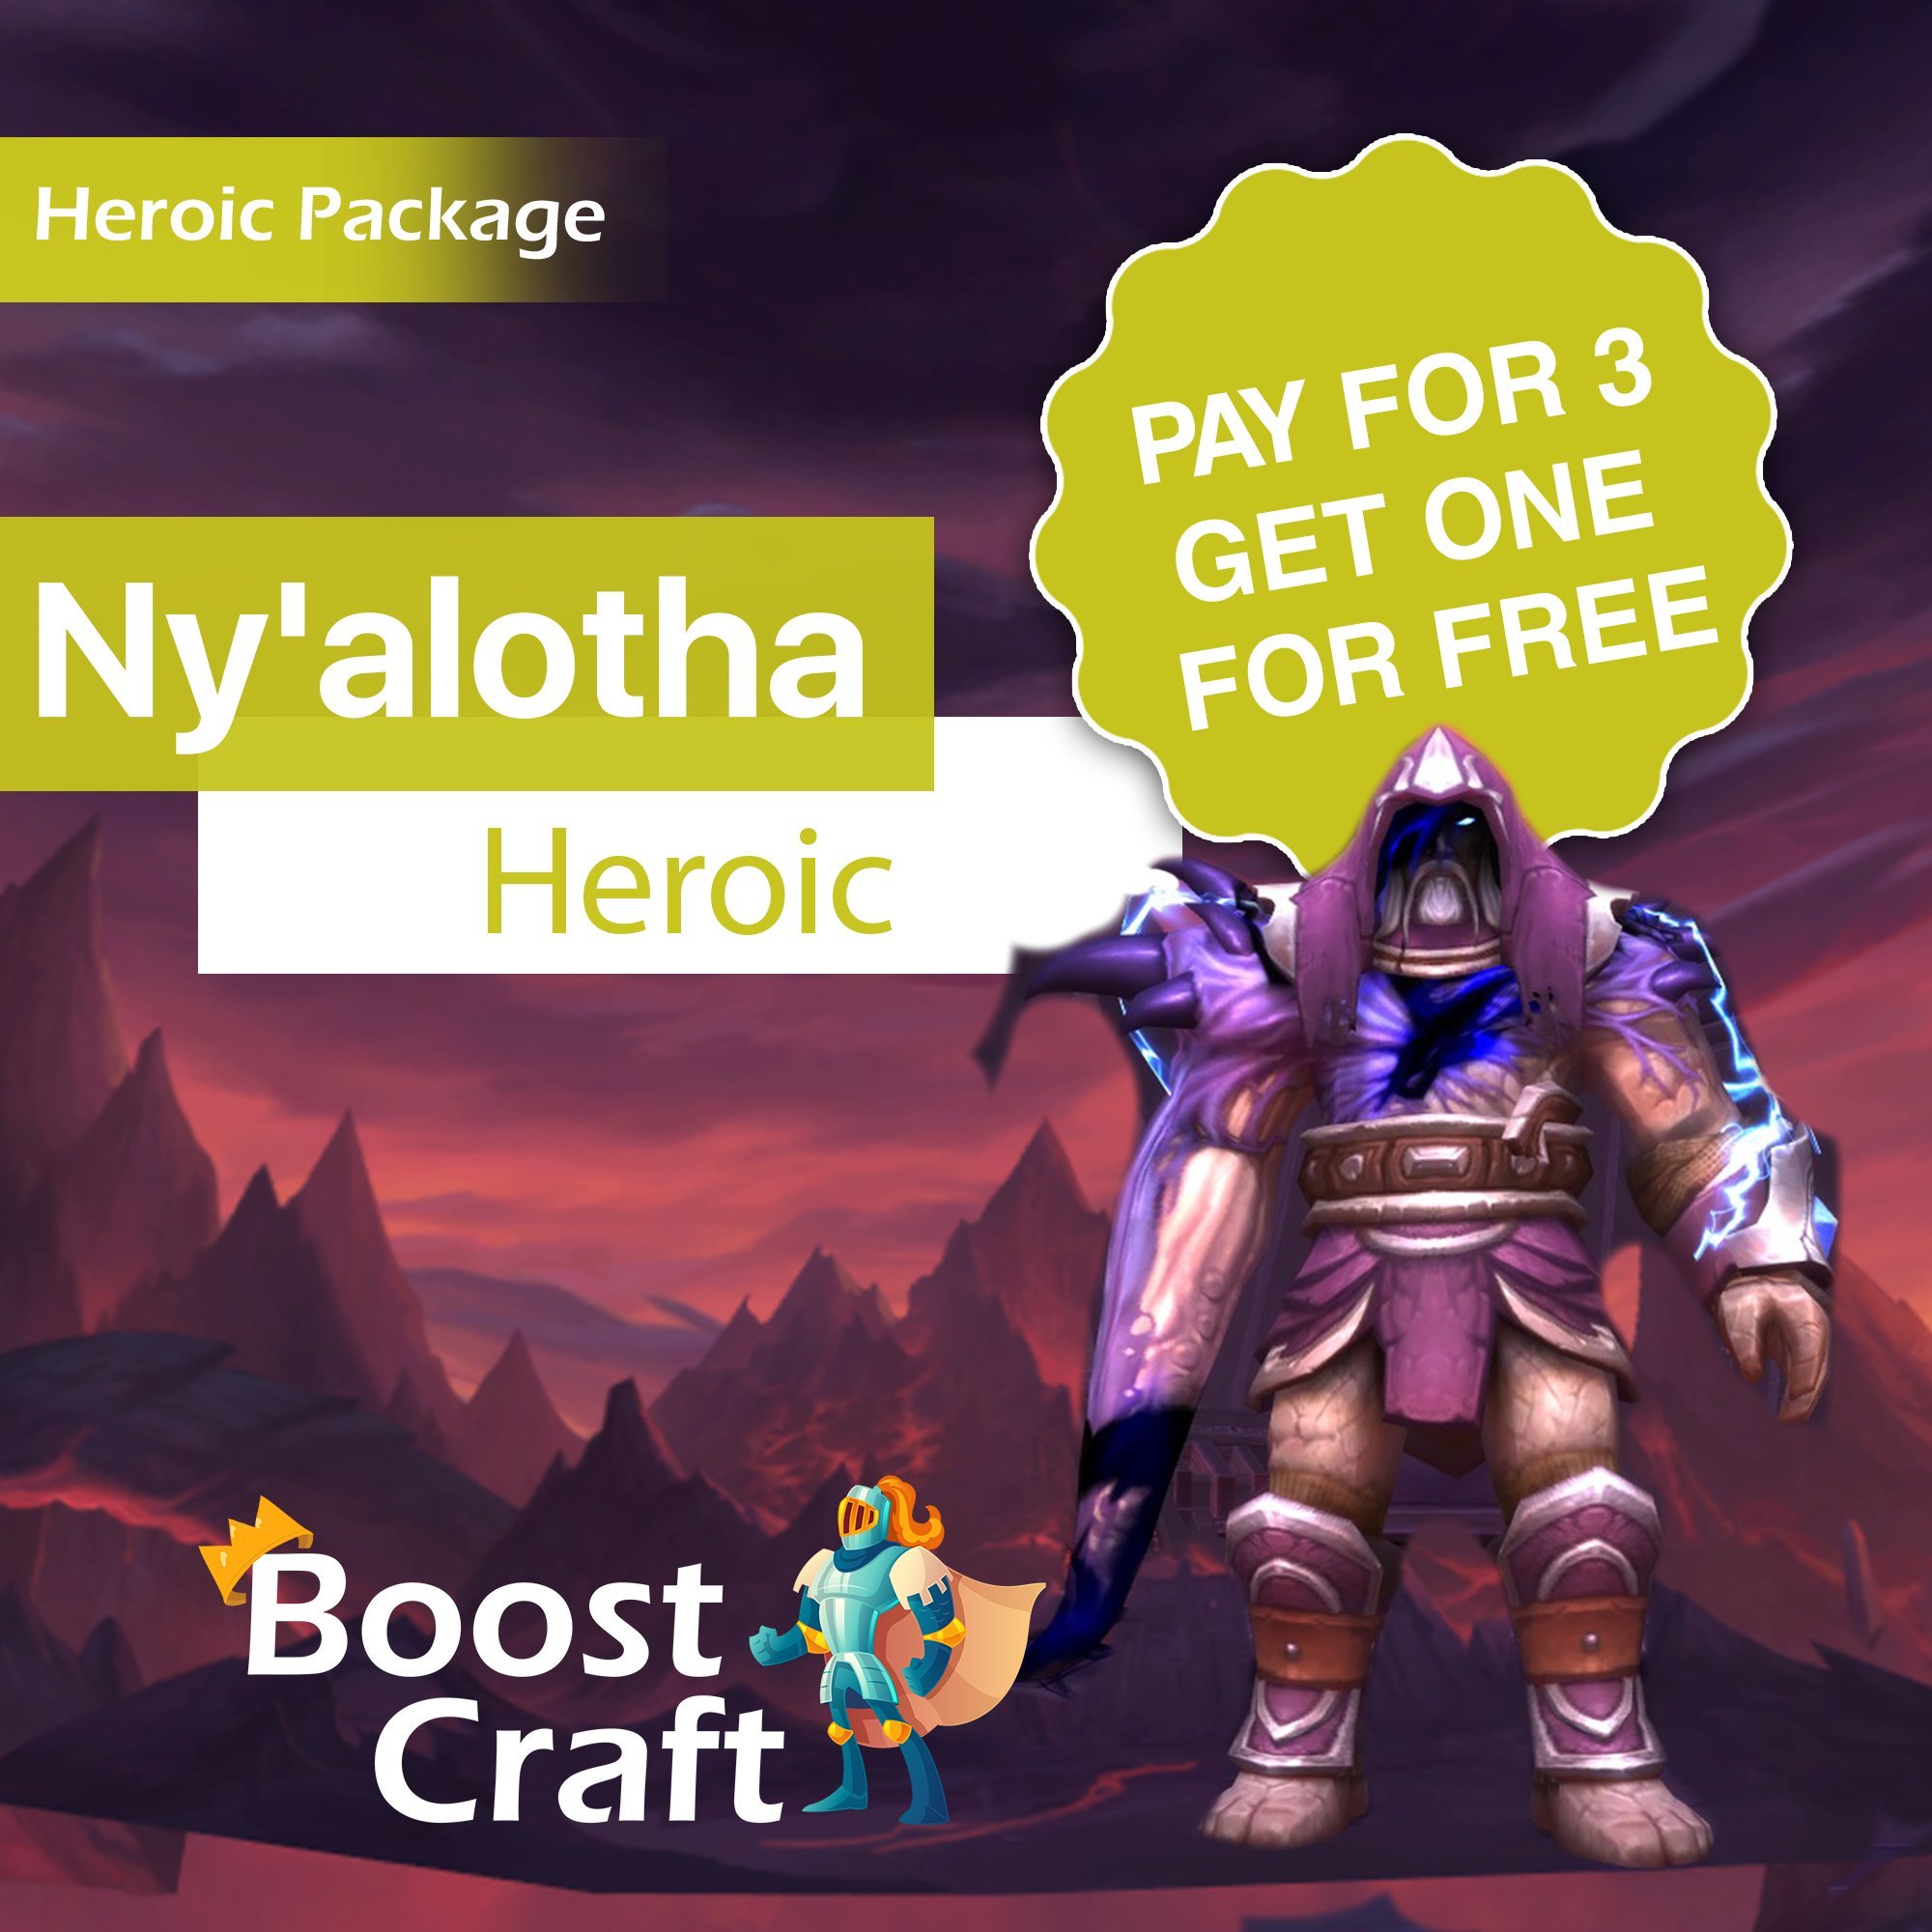 Ny’alotha raid package – Pay for 3 get 1 Free